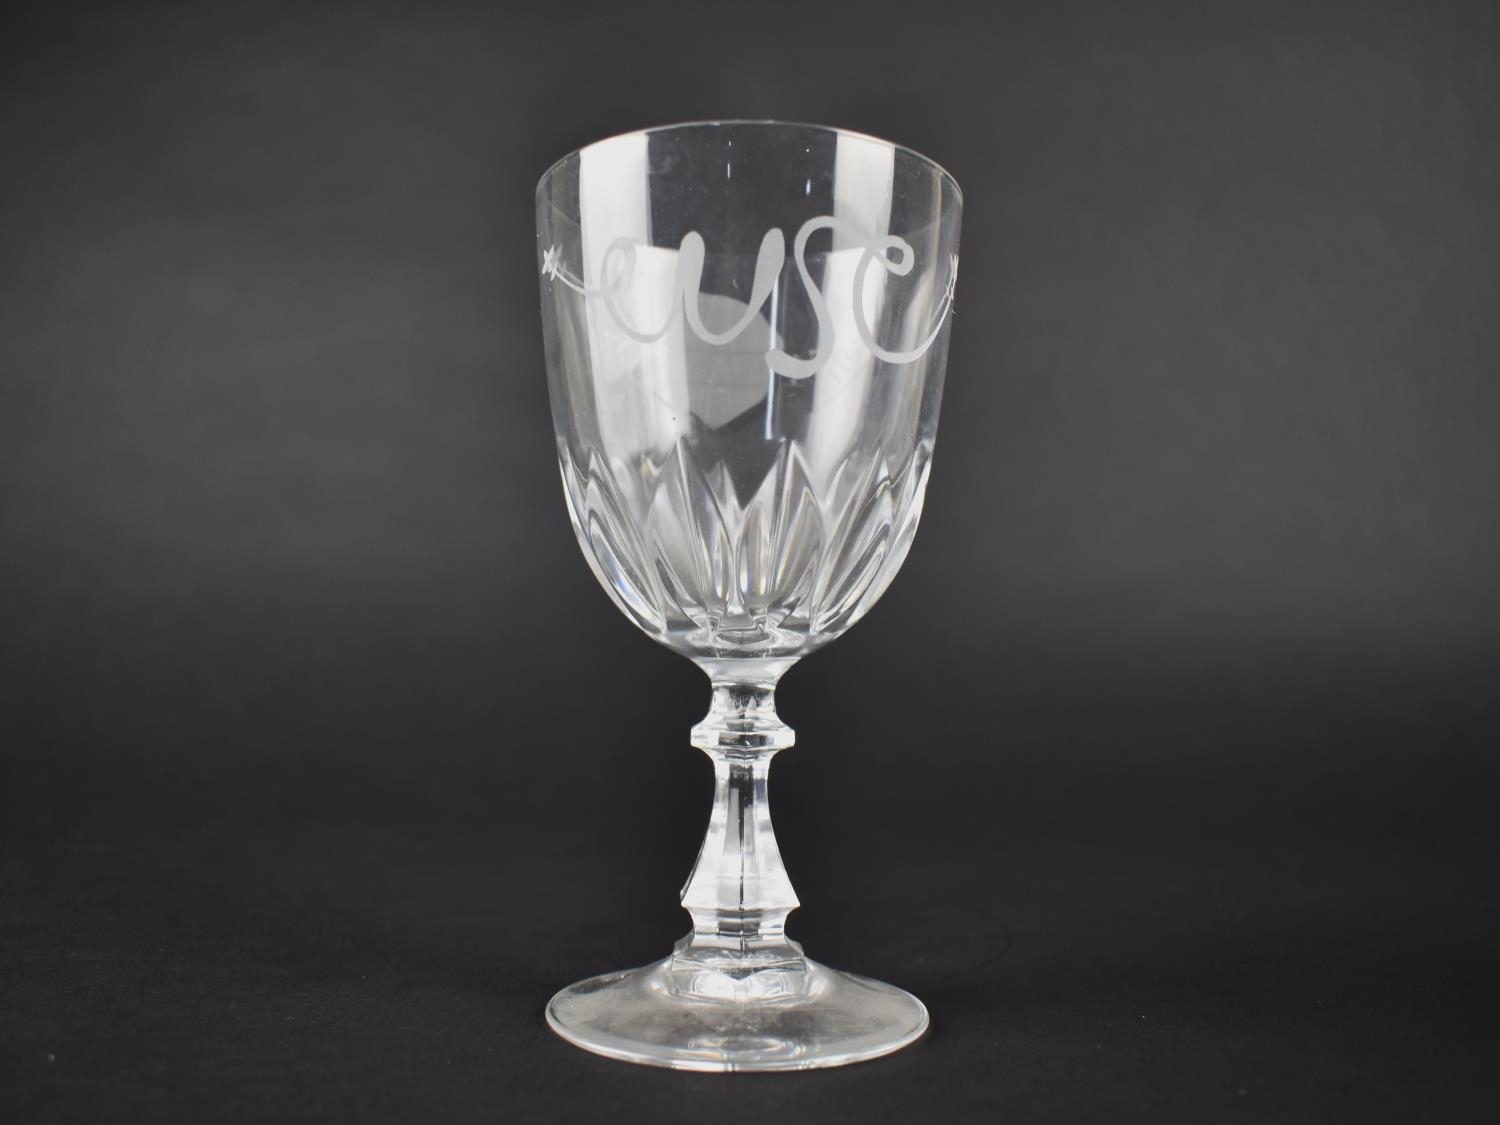 Two Limited Hand Engraved Glasses for The Churchill Centenary - 1874-1974, Together with a 1939-1945 - Image 3 of 5